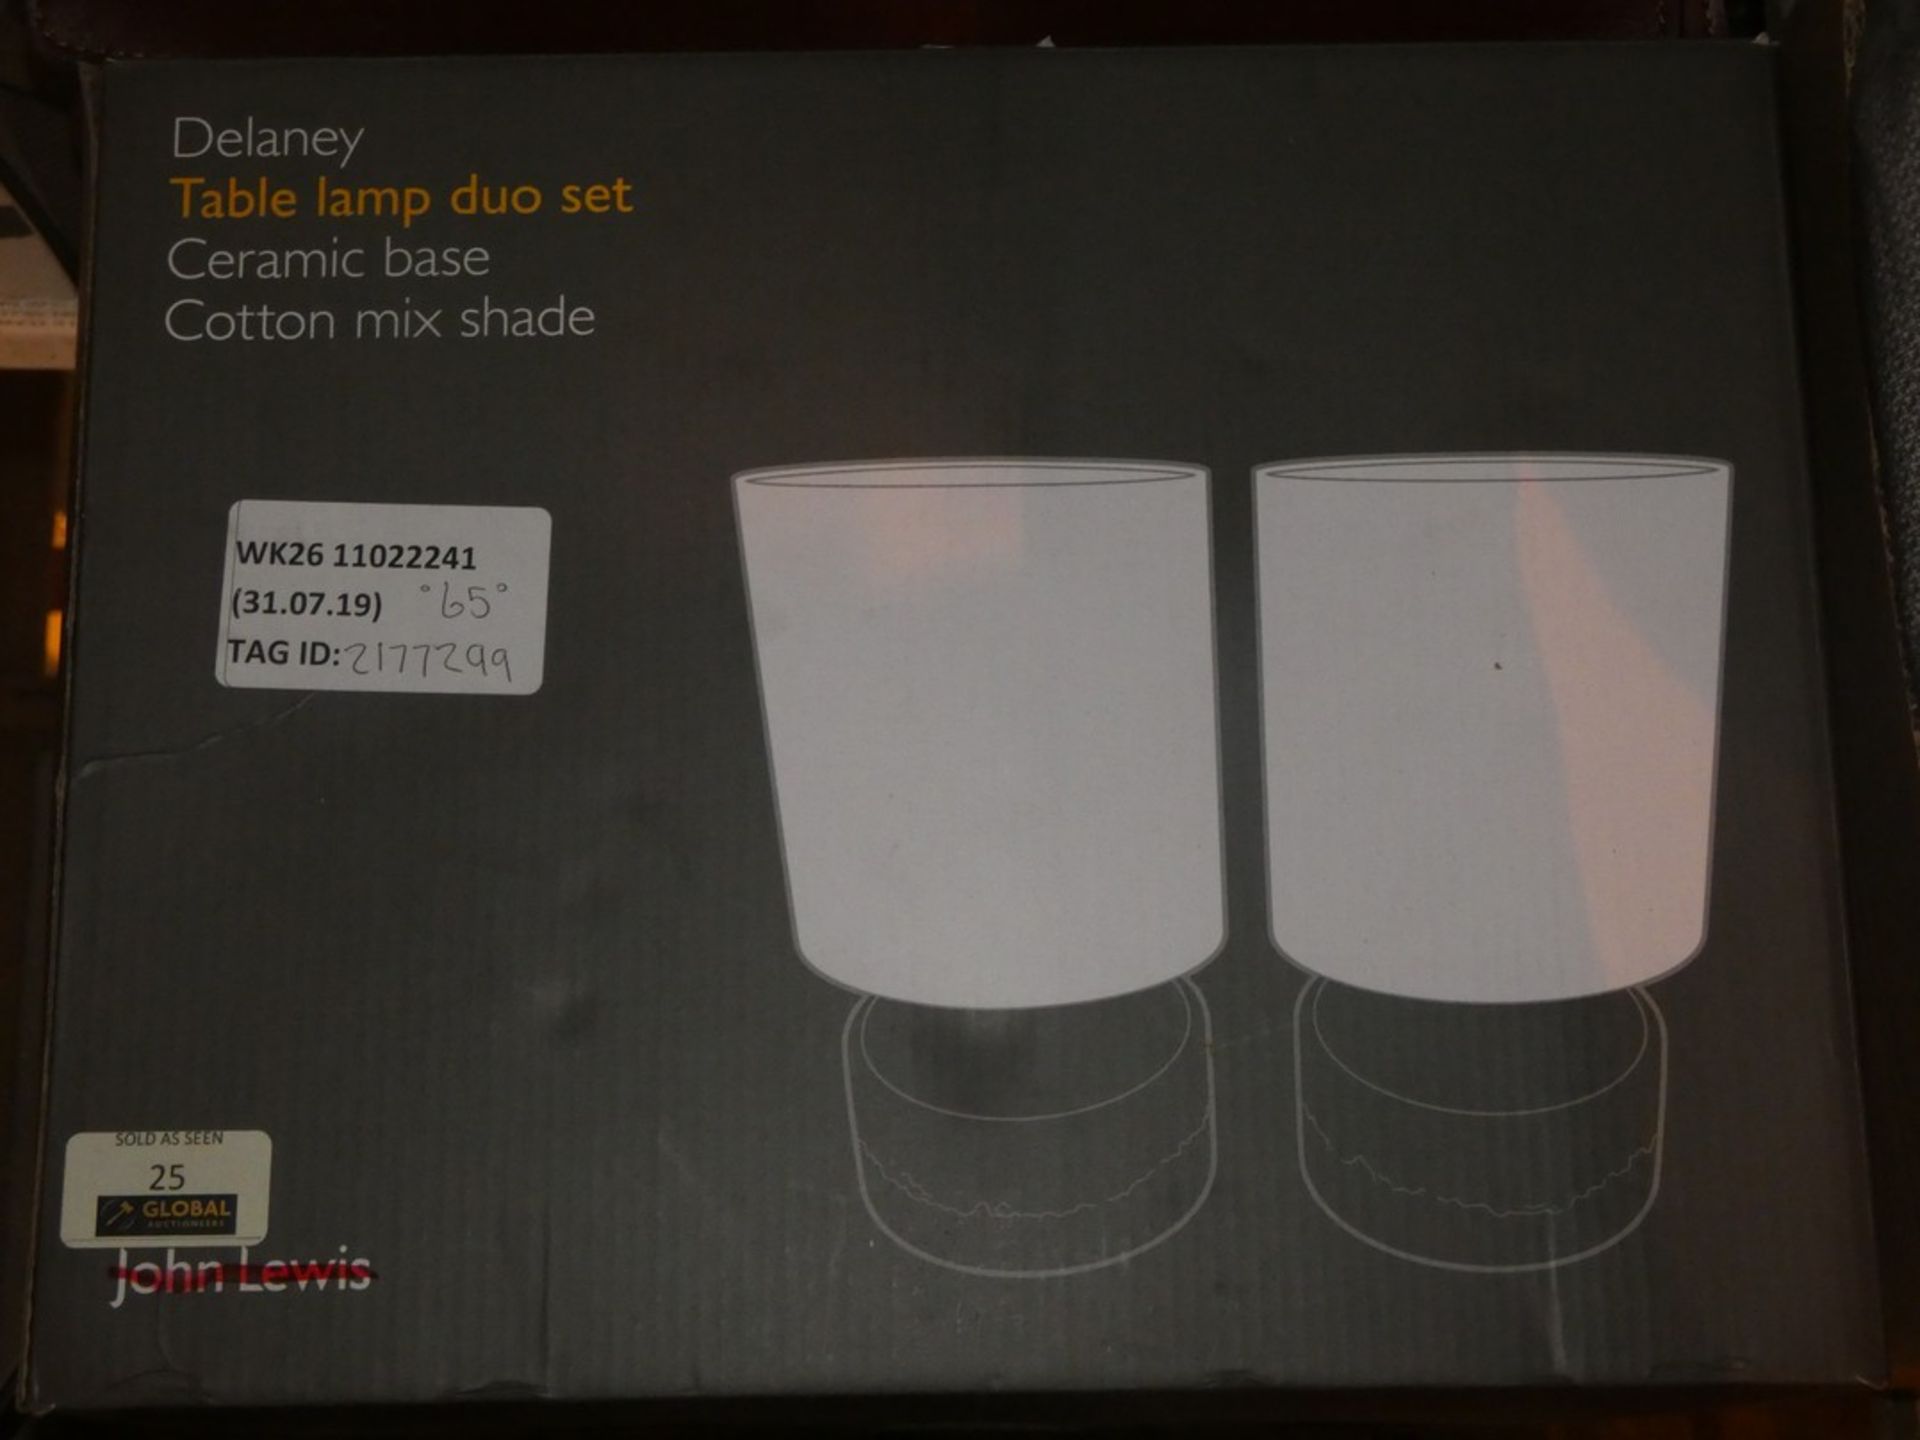 Boxed Pair Of Delaney Ceramic Base Cotton Mix Shade Table Lamps RRP £60 Each (2177299) (Viewings And